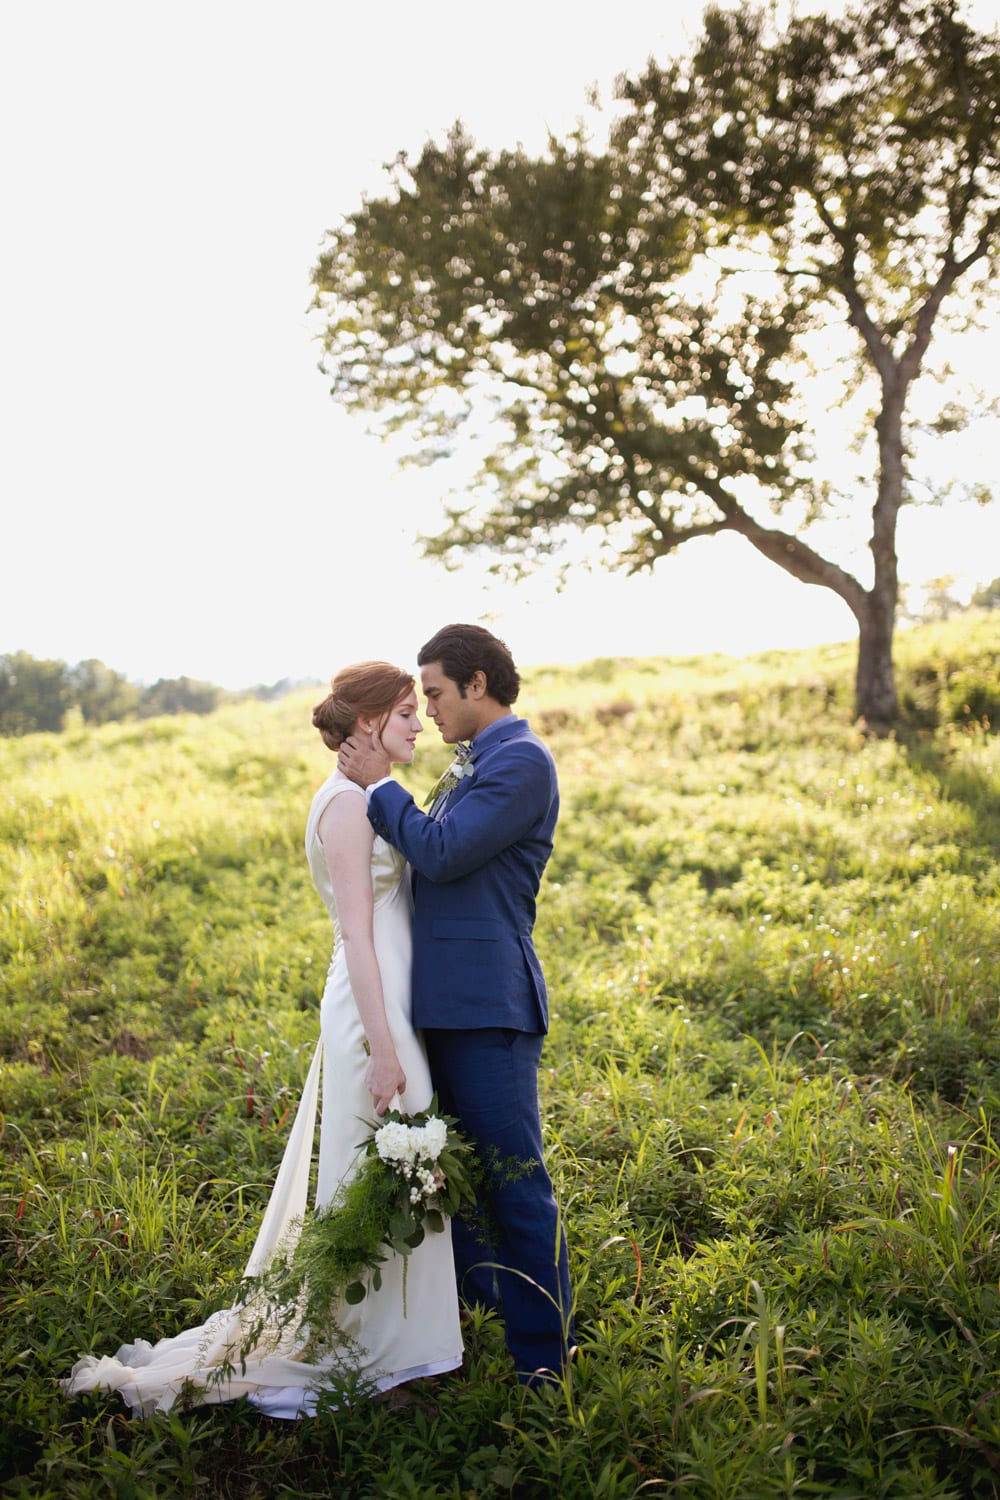 Groom holds bride in front of tree in the pasture